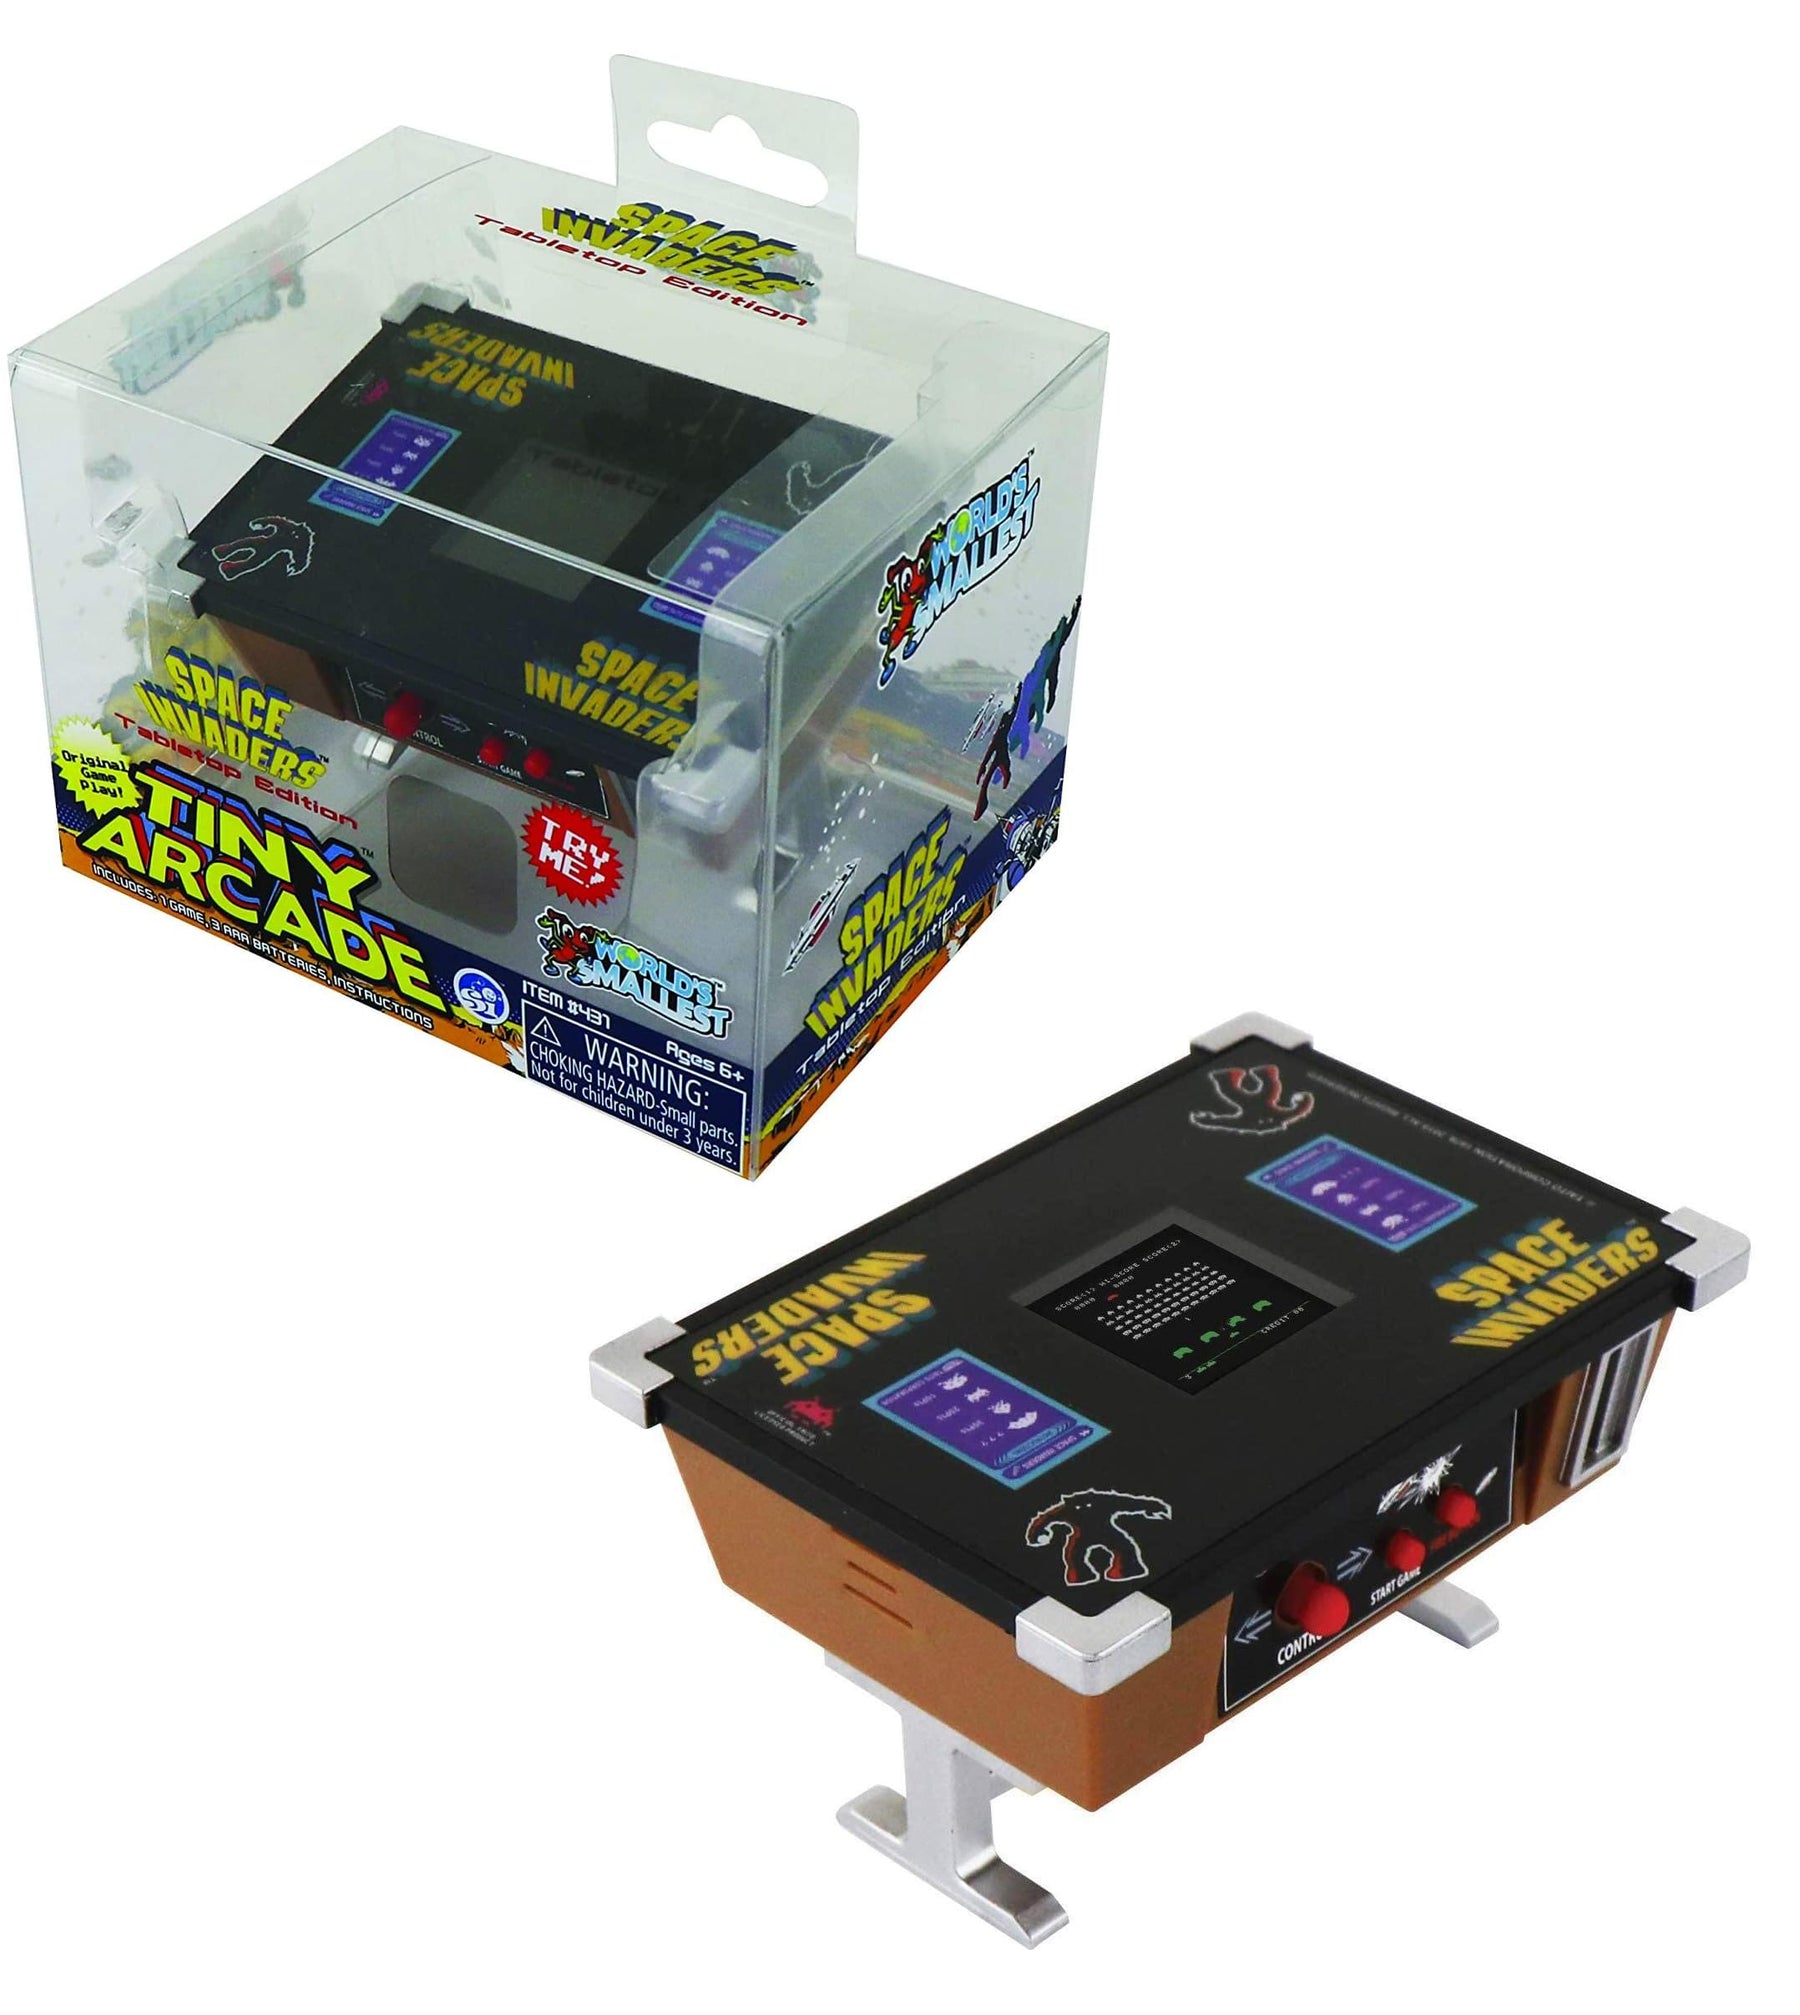 Tiny Arcade Miniature Video Game | Space Invaders Tabletop Edition